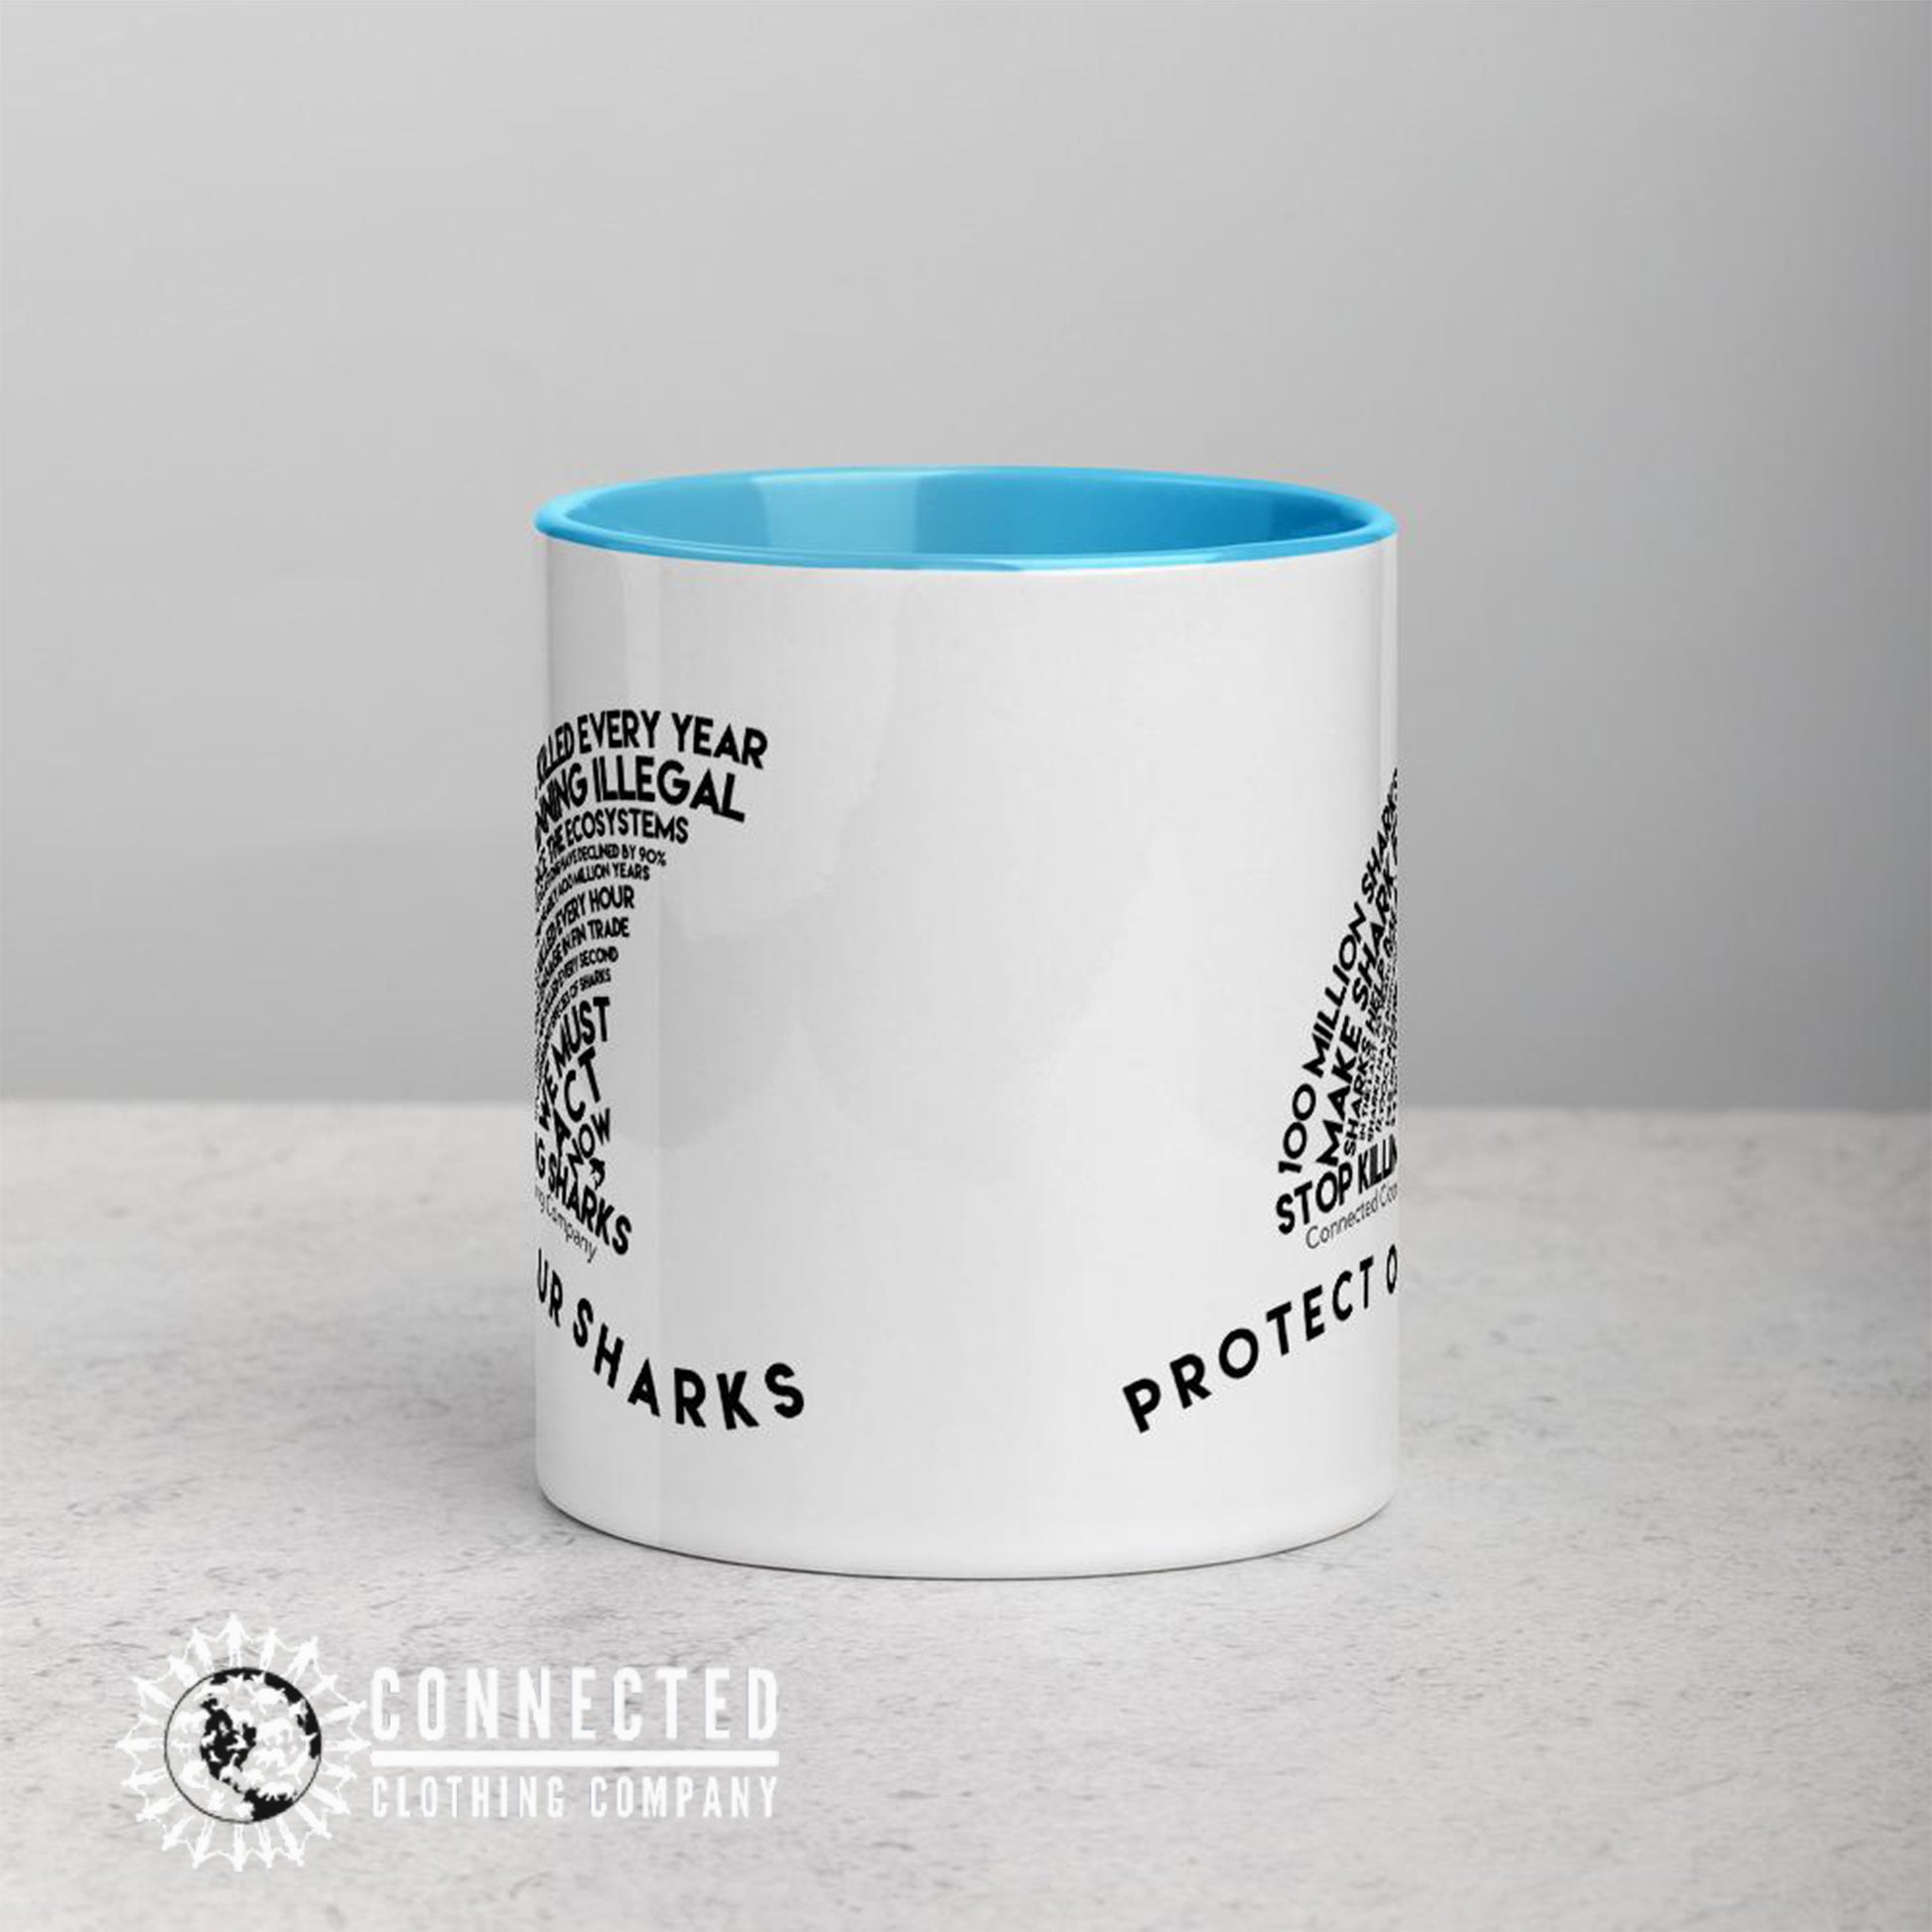 Front Side of Protect Our Sharks Mug With Blue Coloring on Inside, Rim, and Handle - Connected Clothing Company - Ethically and Sustainably Made - 10% donated to Oceana shark conservation